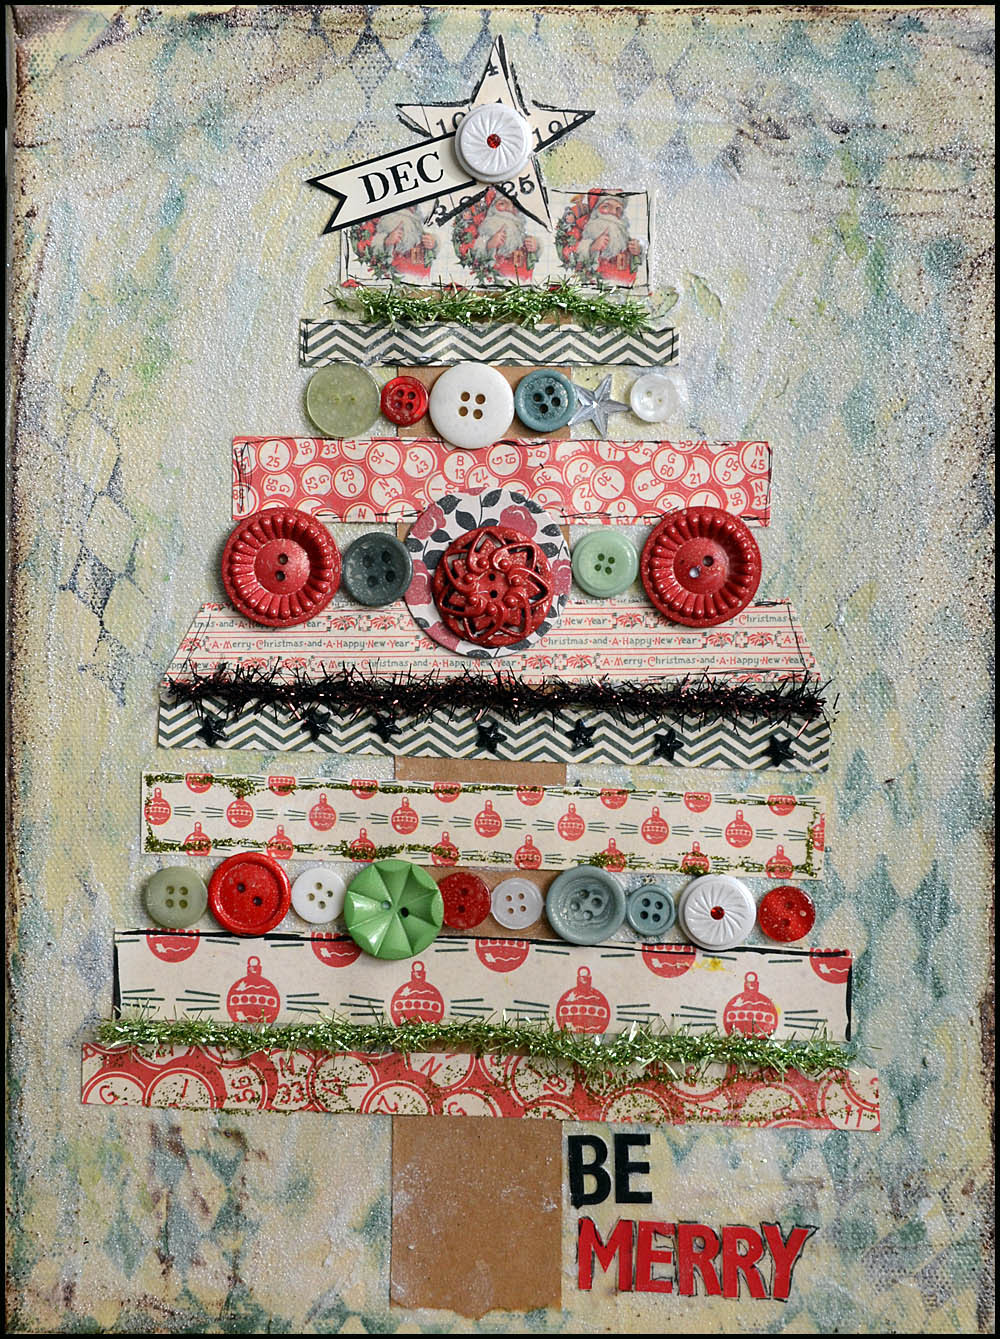 Christmas Canvas Painting Ideas
 jbs inspiration "Be Merry" Christmas Canvas from May Flaum